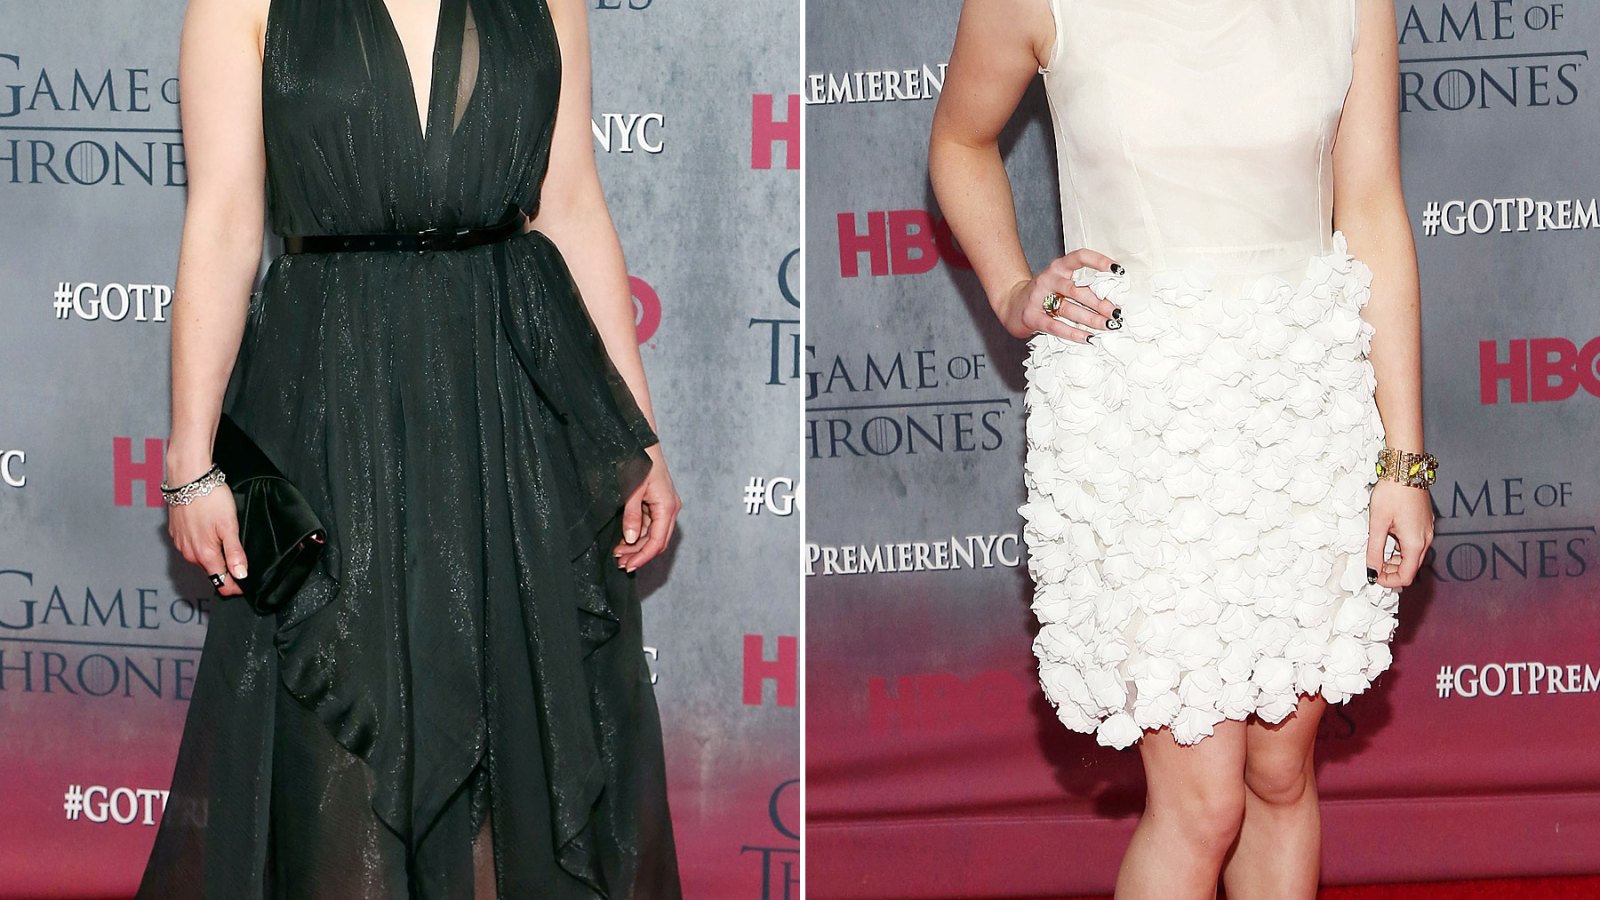 Emilia Clarke and Maisie Williams at the Game of Thrones premiere